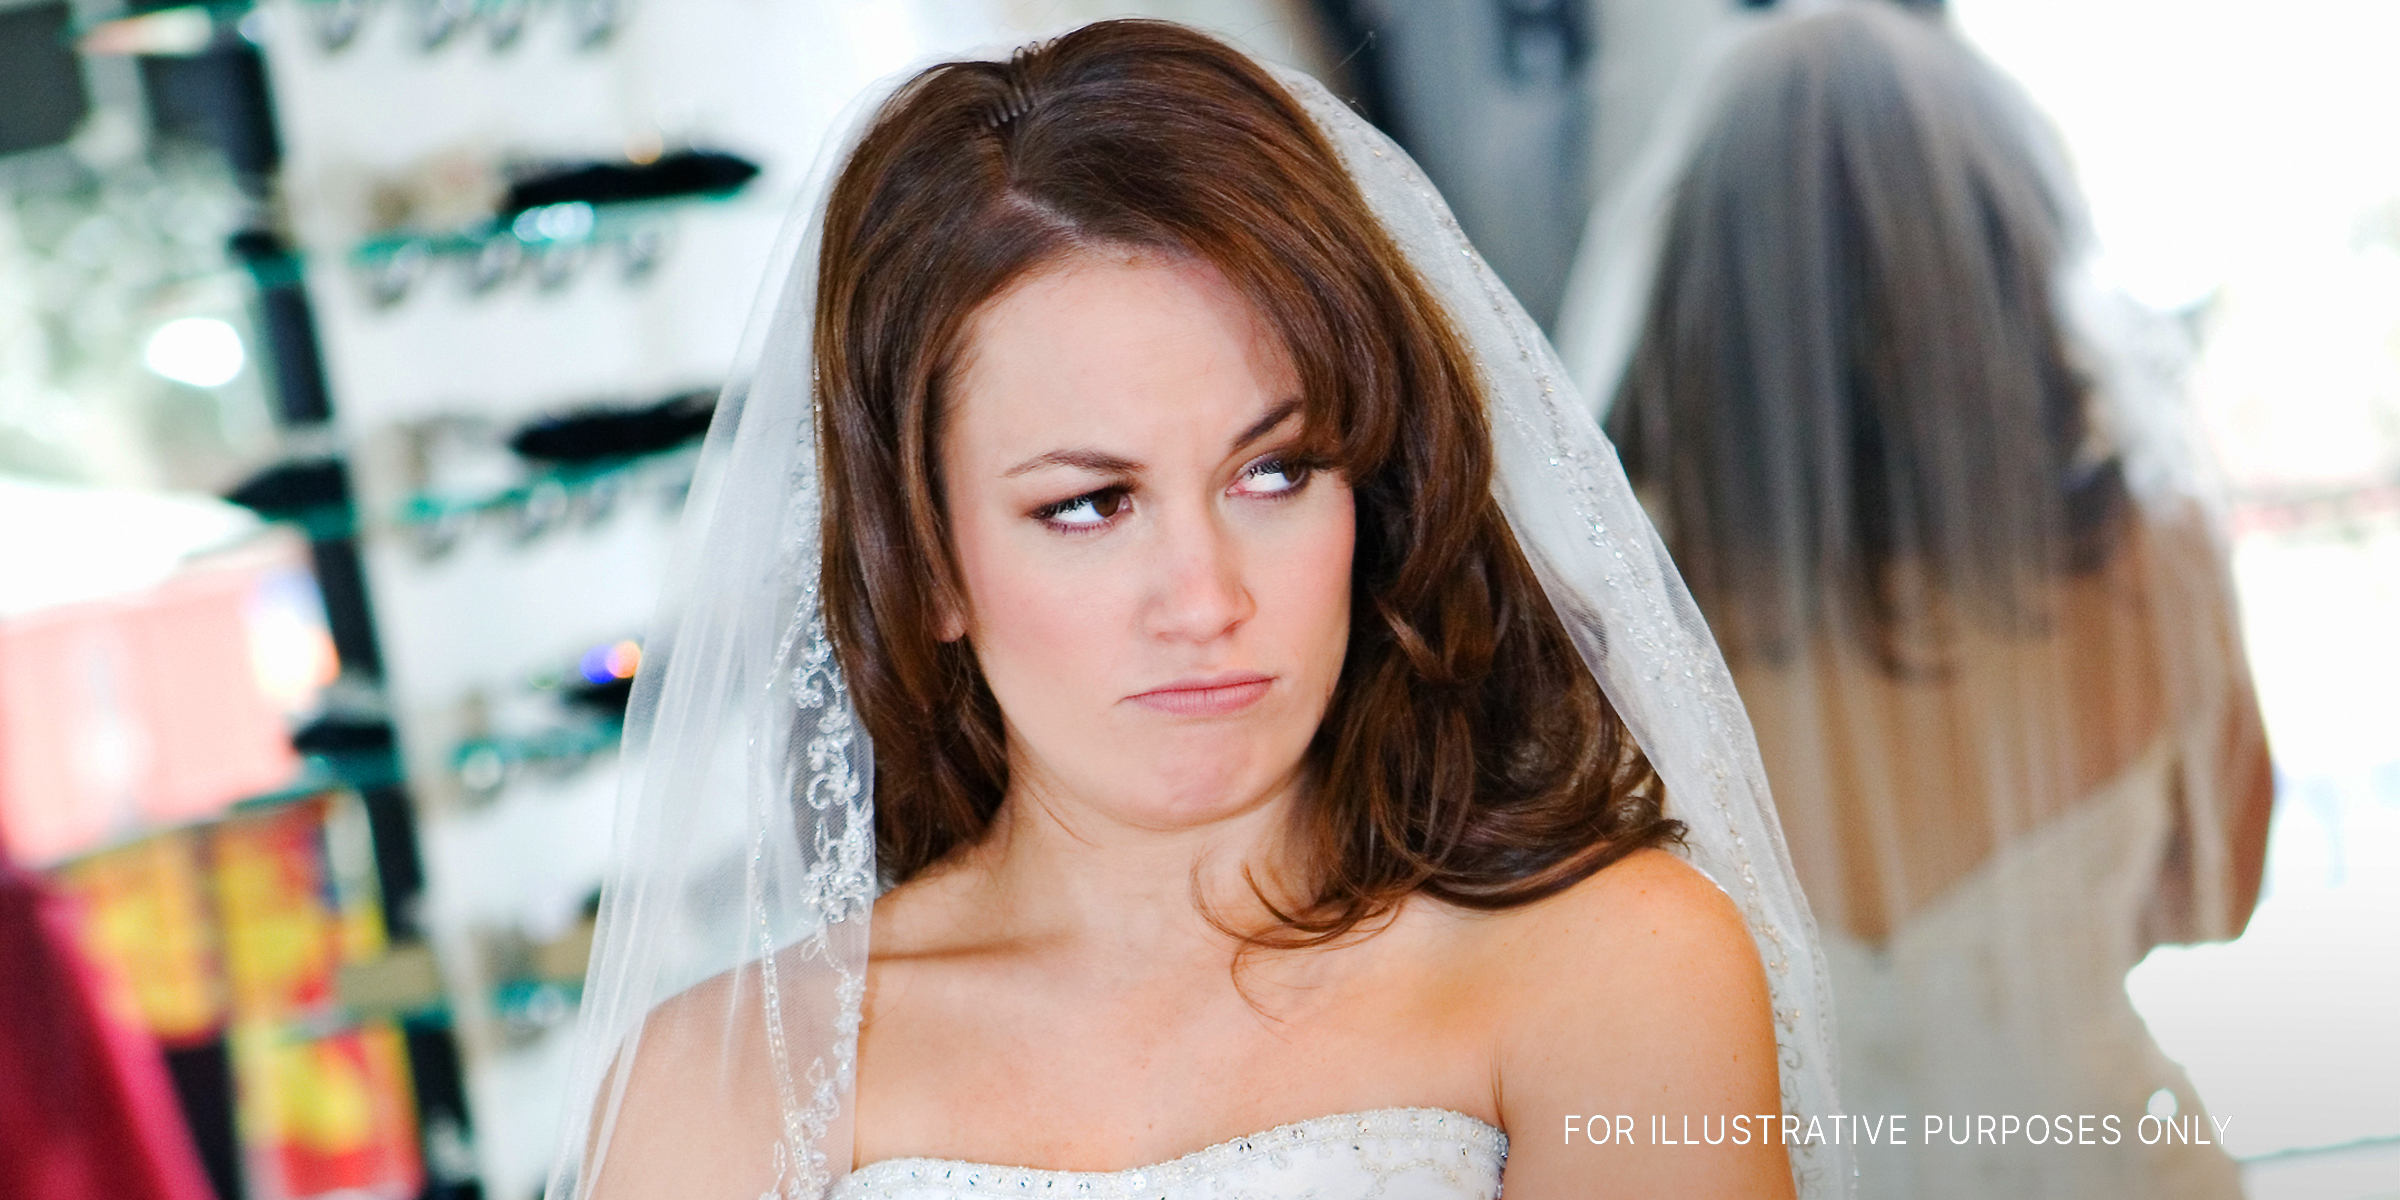 An angry bride | Source: Shutterstock